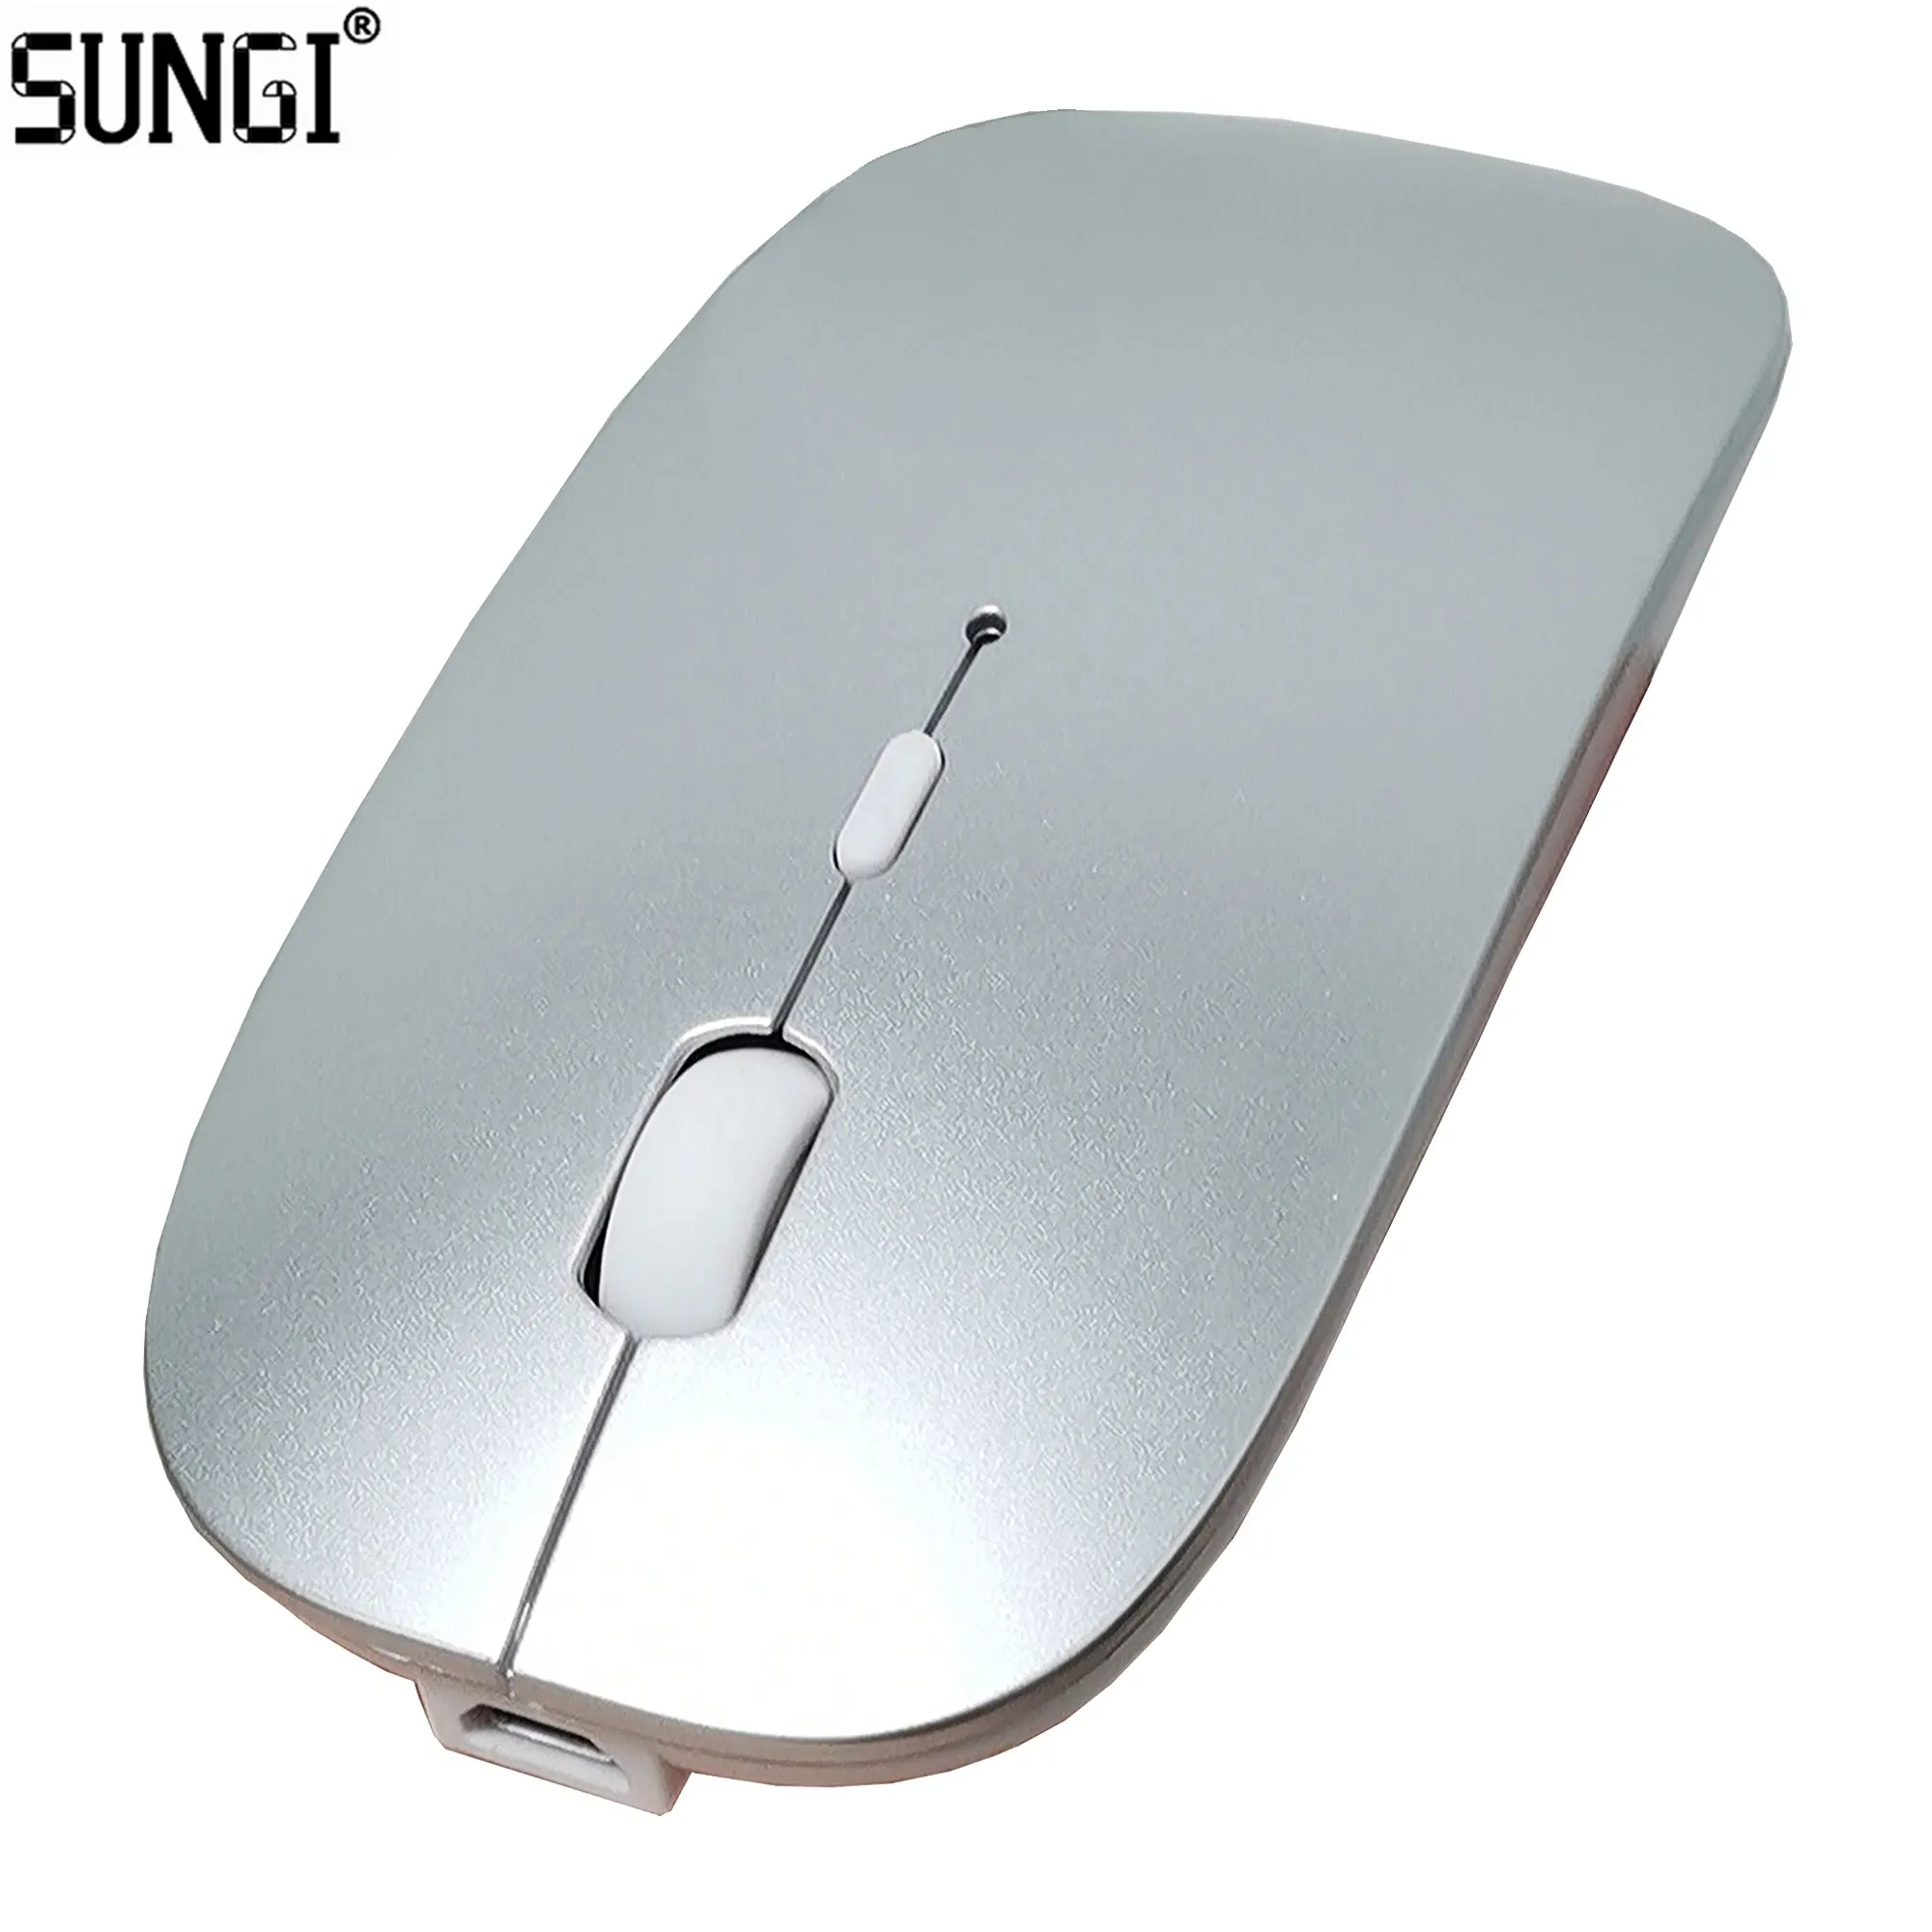 SUNGI Good Quality Silent Wireless Bluet ooth Mouse with Rechargeable Lithium Battery for iPhone iPad Macbook